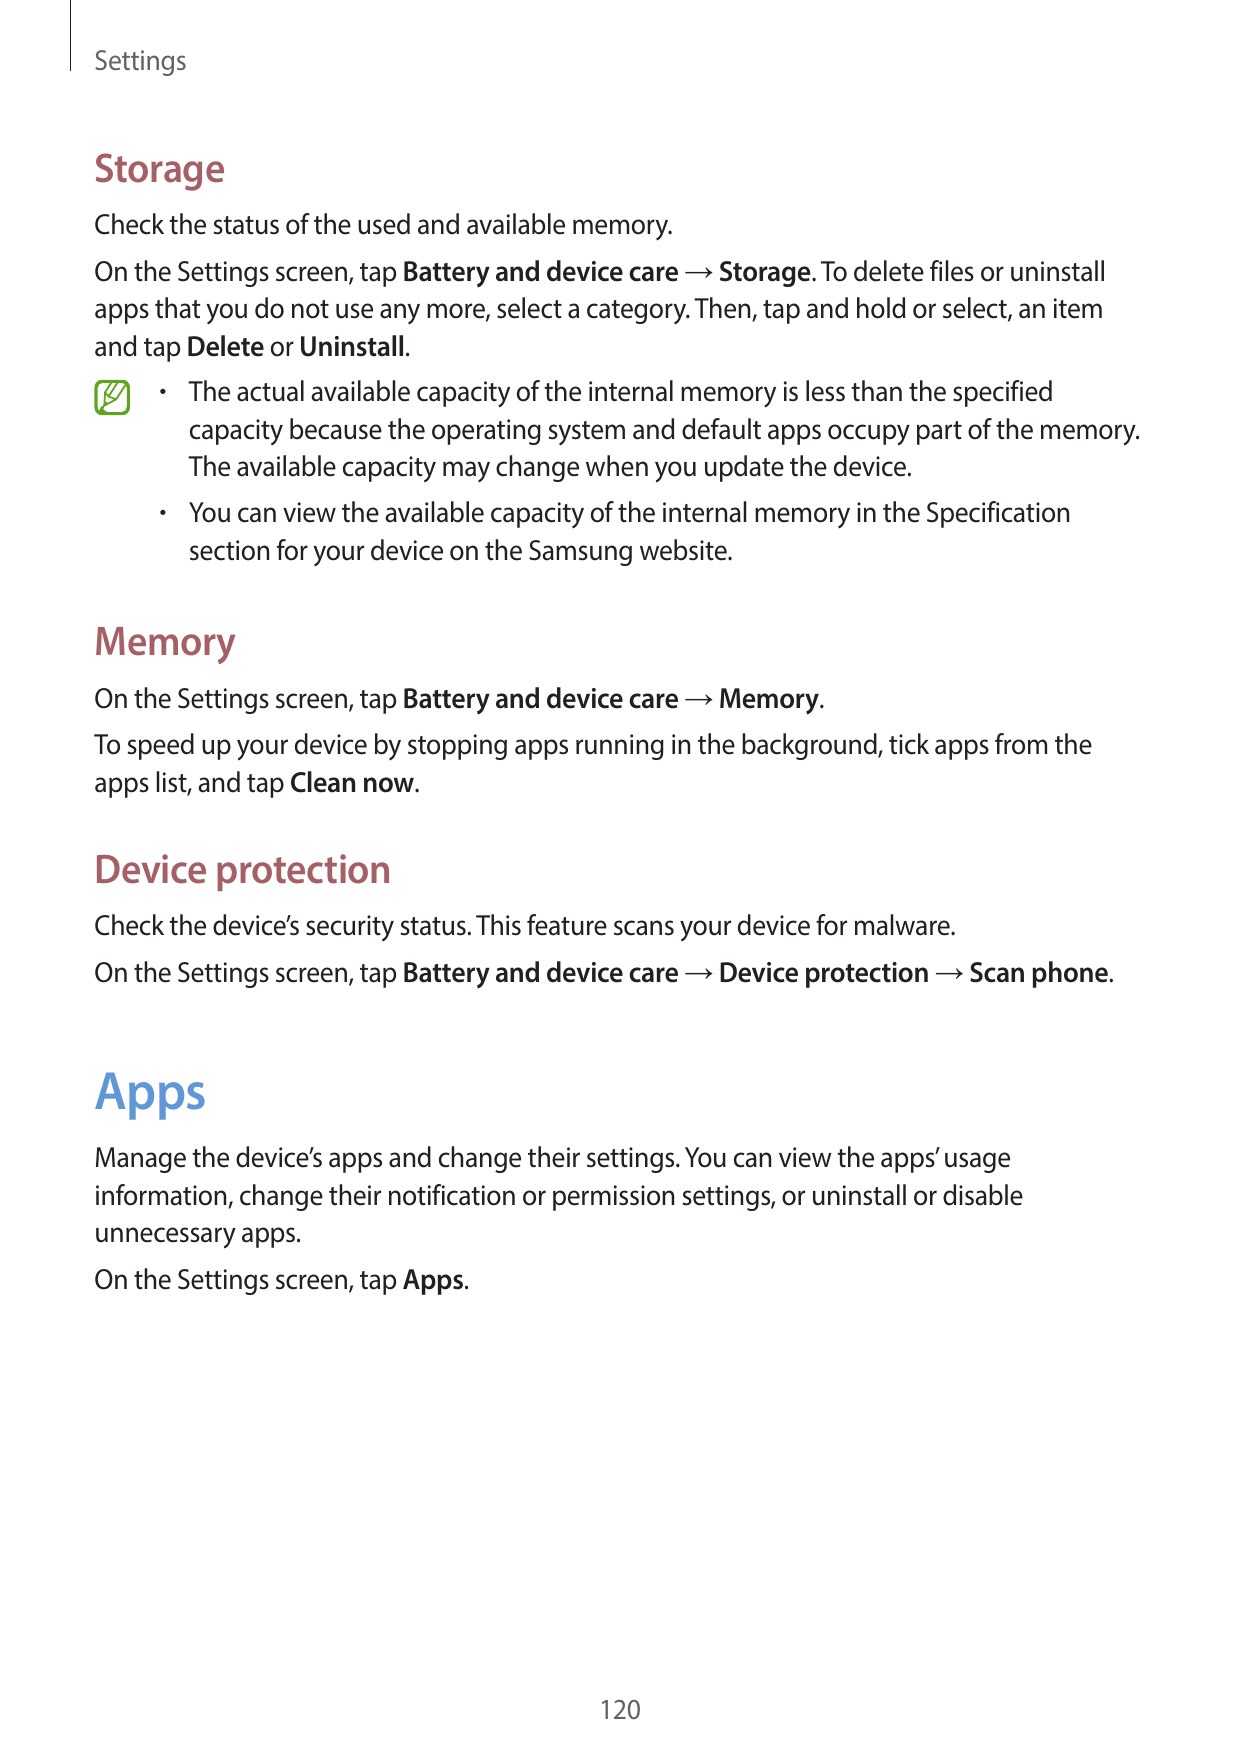 SettingsStorageCheck the status of the used and available memory.On the Settings screen, tap Battery and device care → Storage. 